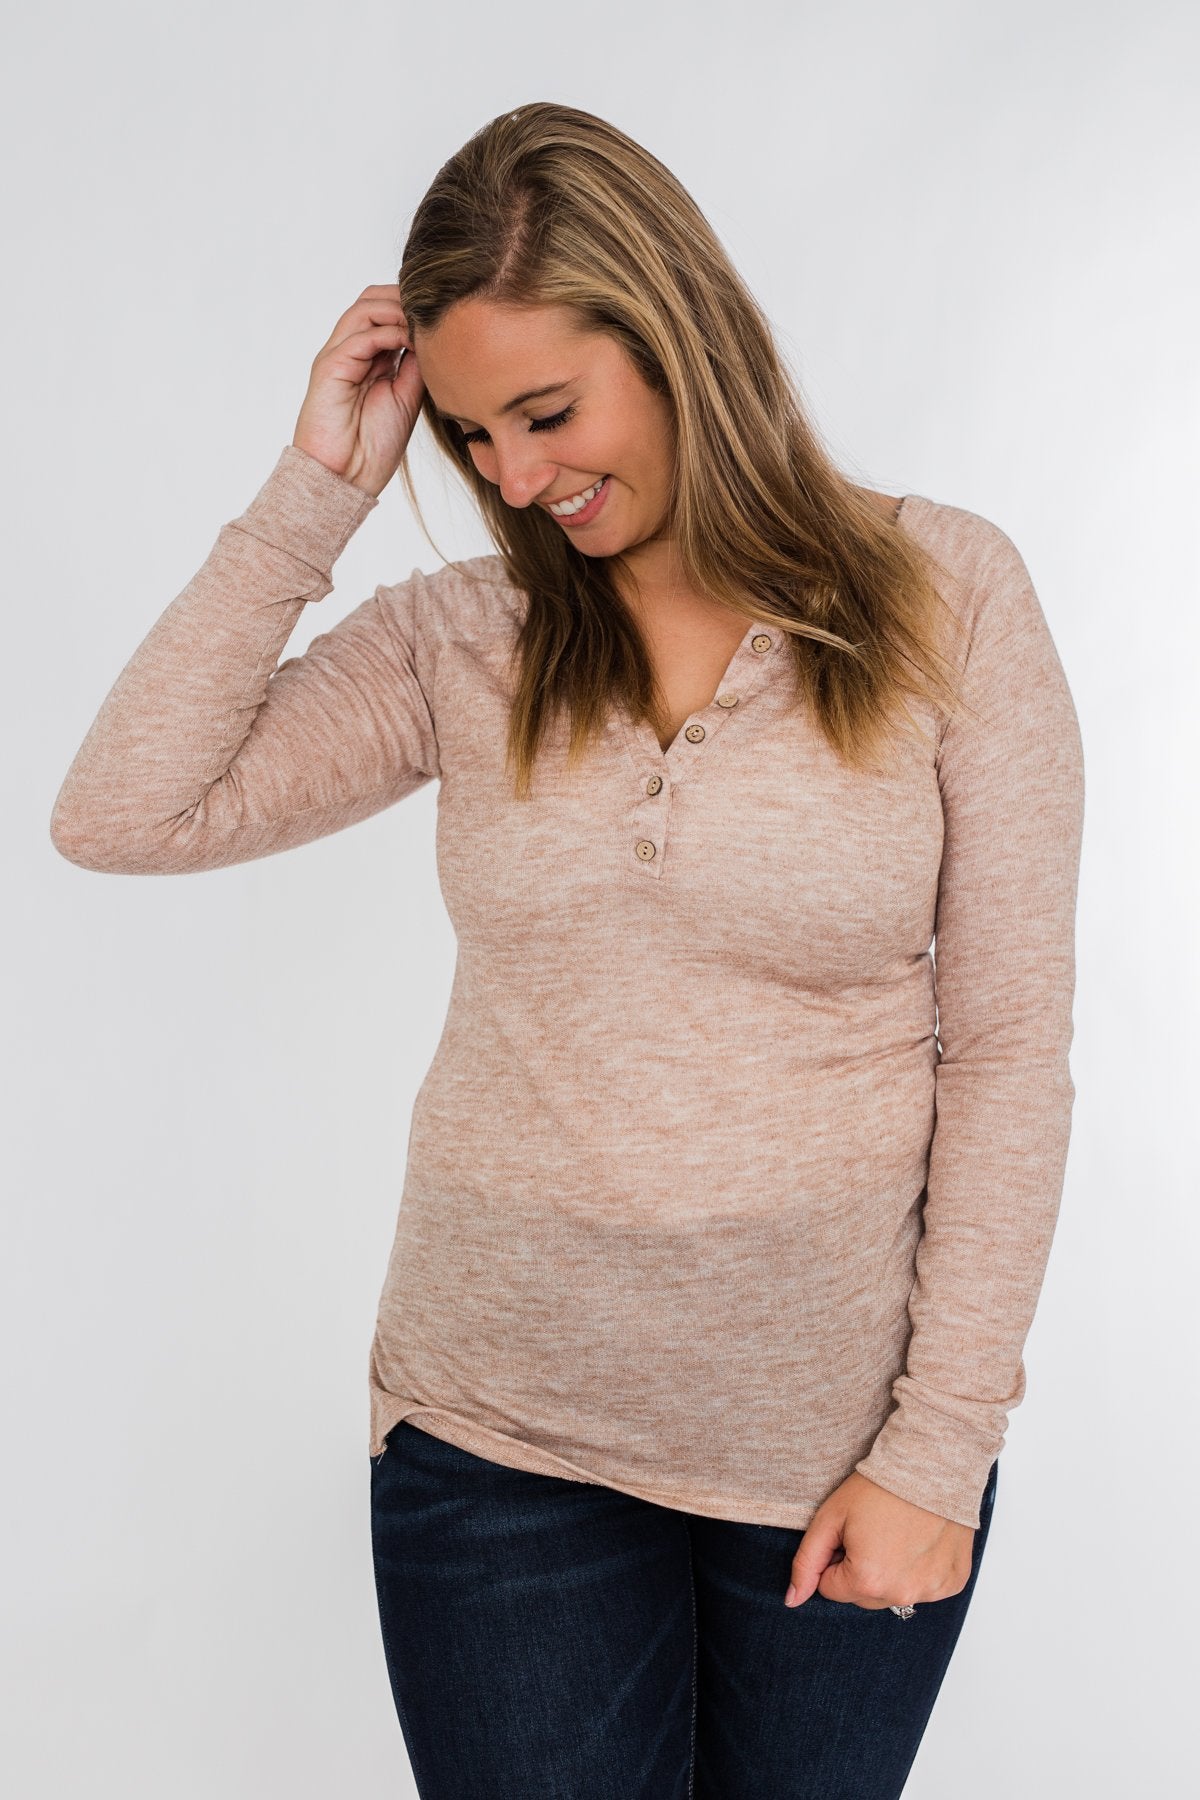 The Time Of My Life Button Henley Top- Oatmeal